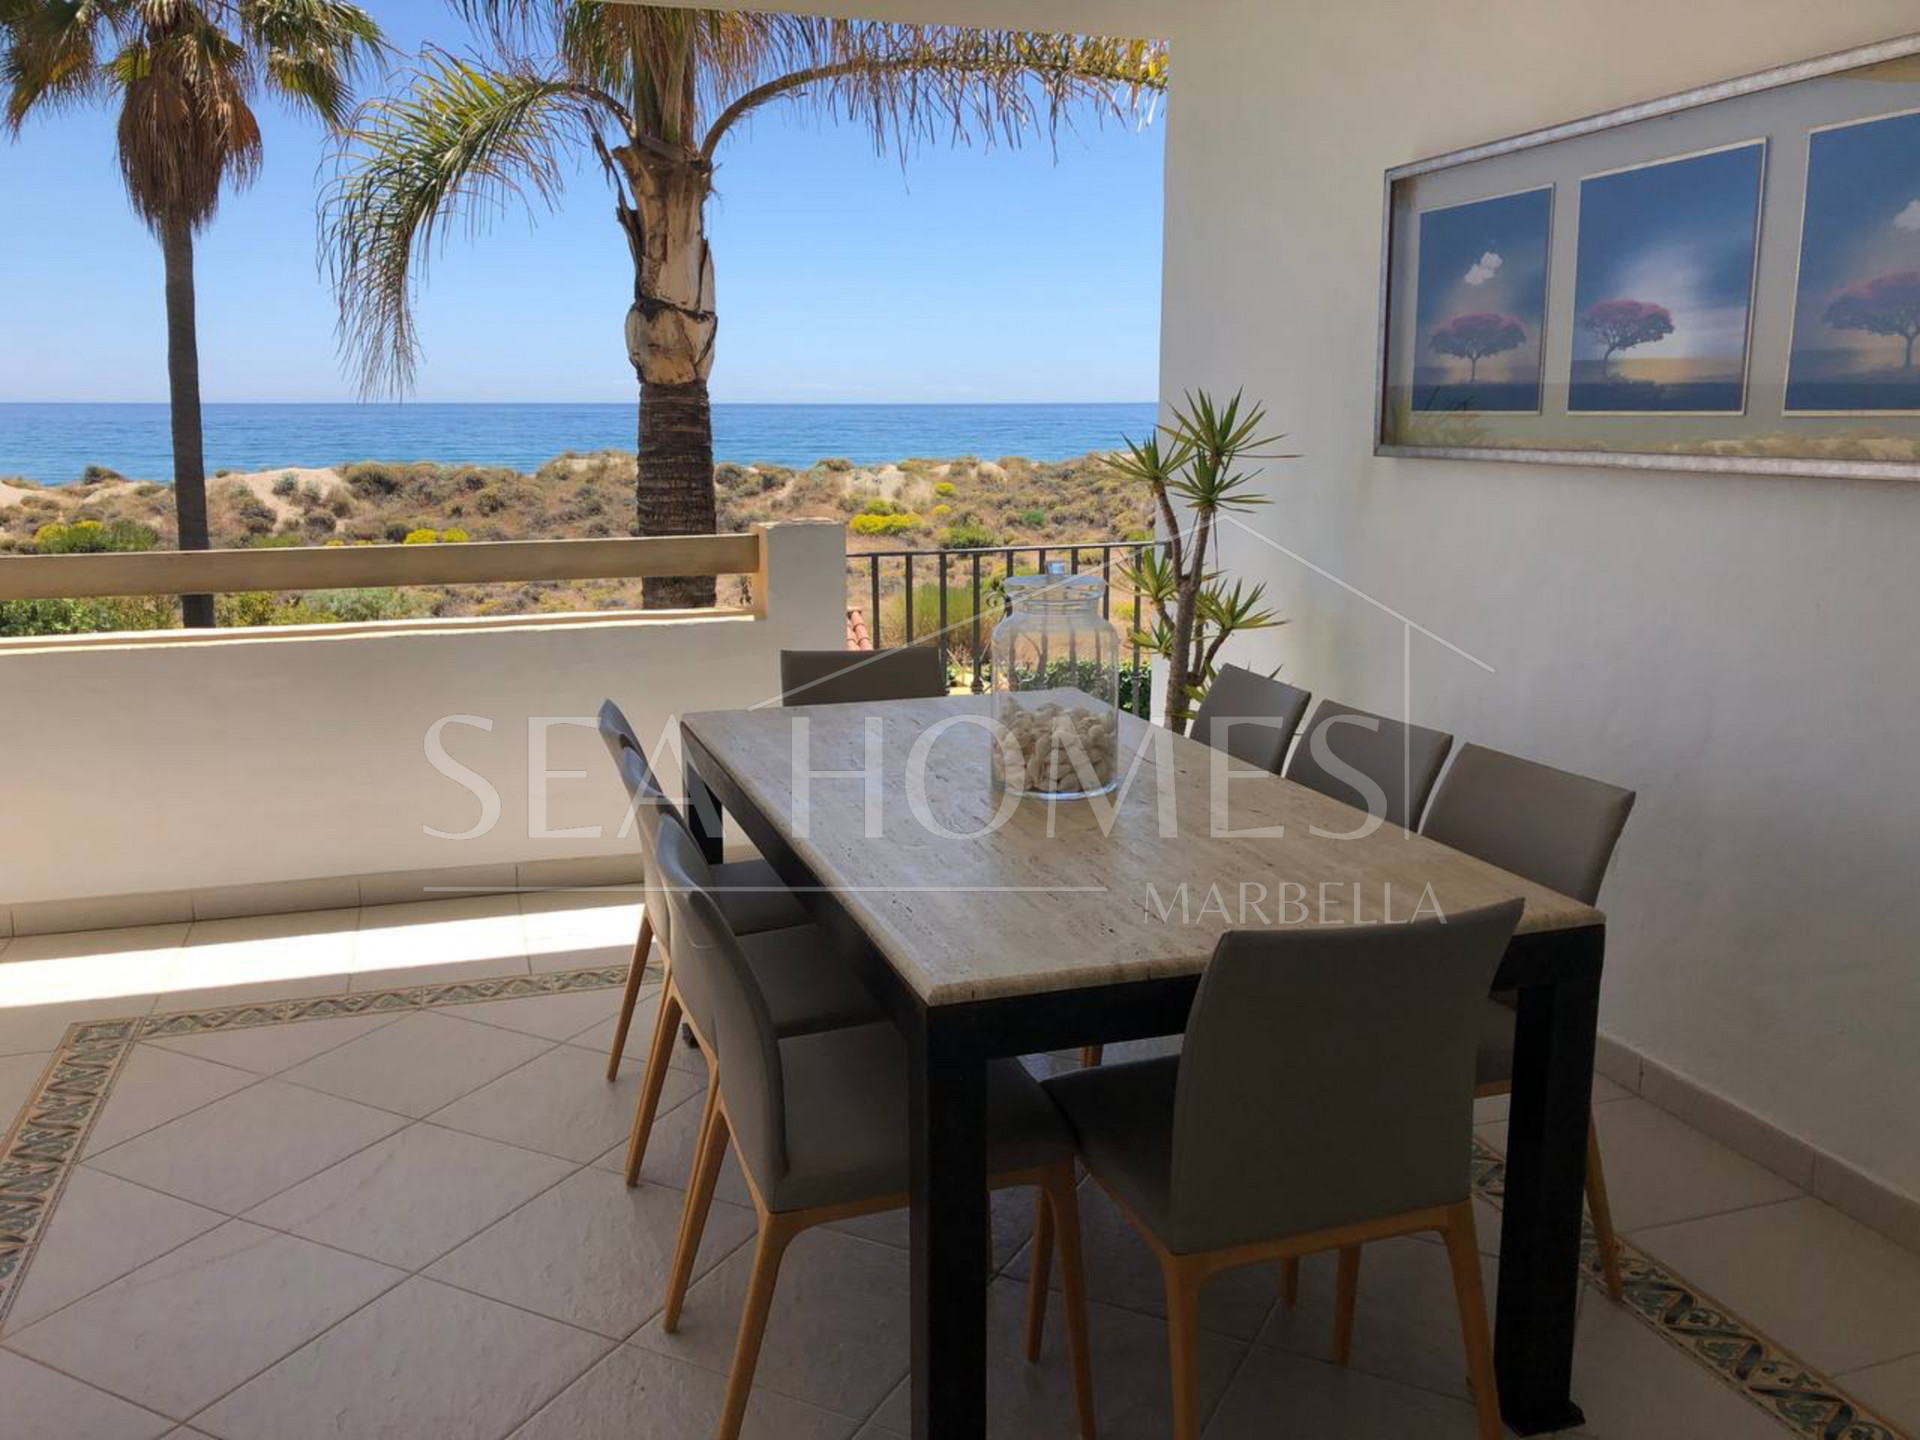 House for sale and for rent in Arenas de Bahia Marbella, Marbella